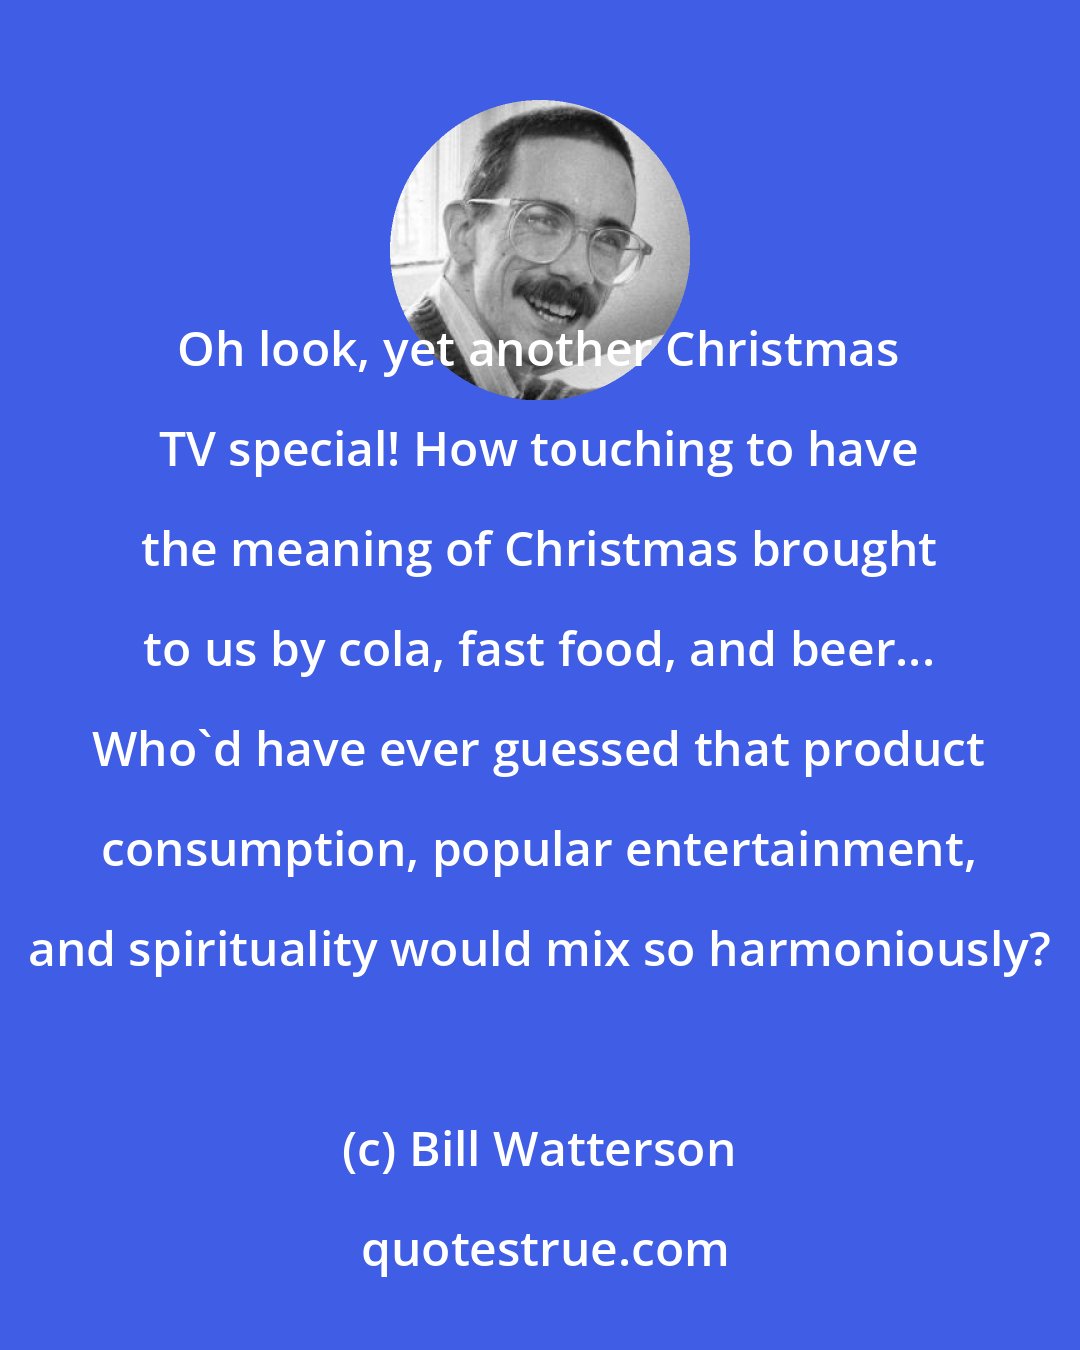 Bill Watterson: Oh look, yet another Christmas TV special! How touching to have the meaning of Christmas brought to us by cola, fast food, and beer... Who'd have ever guessed that product consumption, popular entertainment, and spirituality would mix so harmoniously?